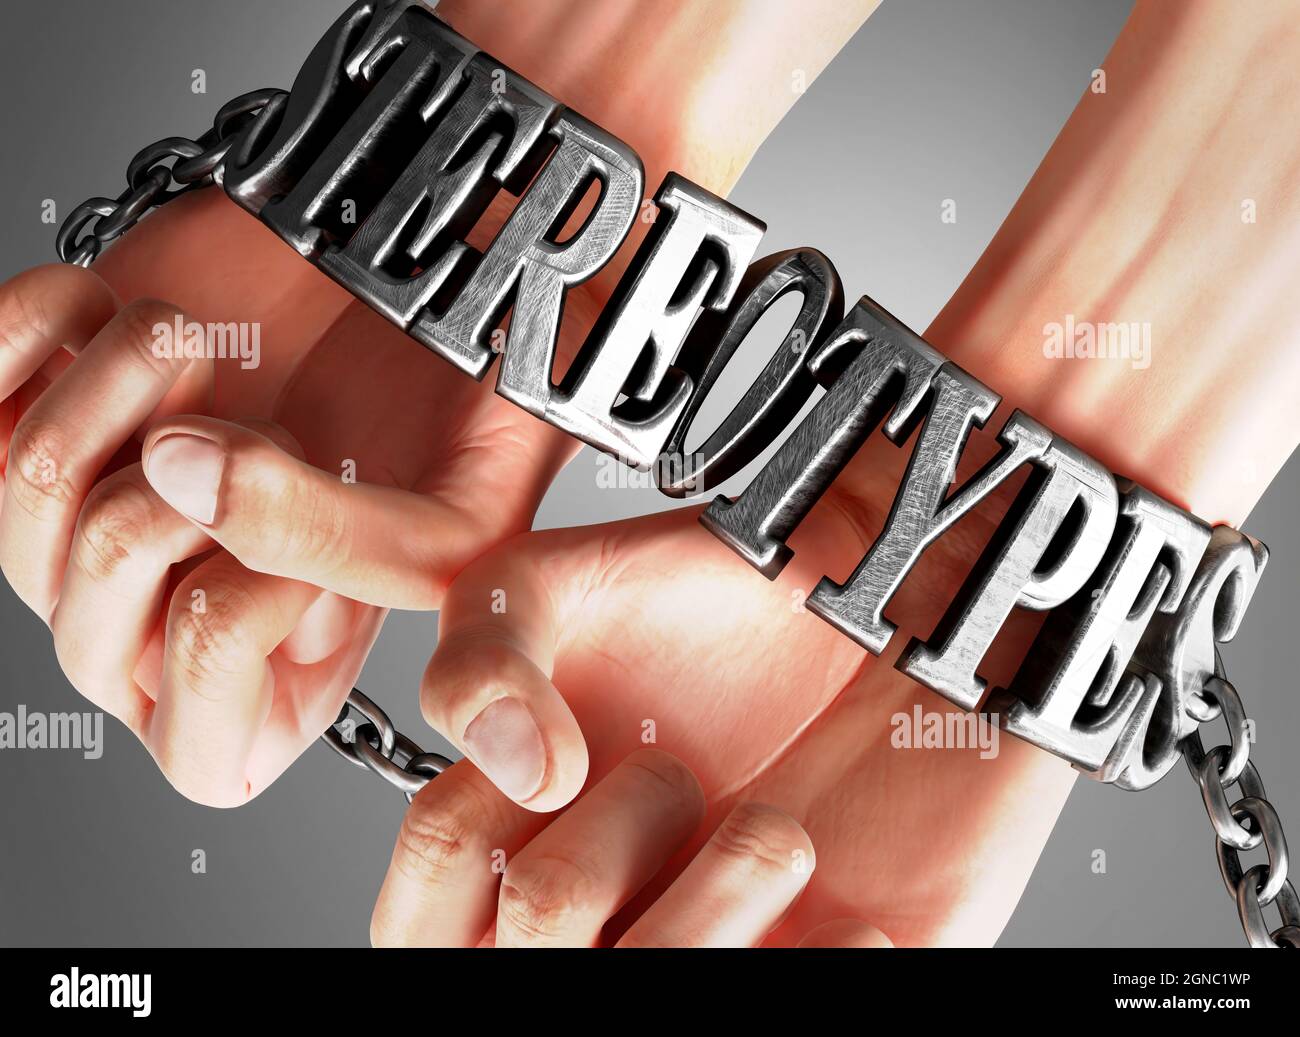 Social impact and influence of stereotypes - analogy showing human hands in chains with a word stereotypes as a symbol of its burden and misery it bri Stock Photo